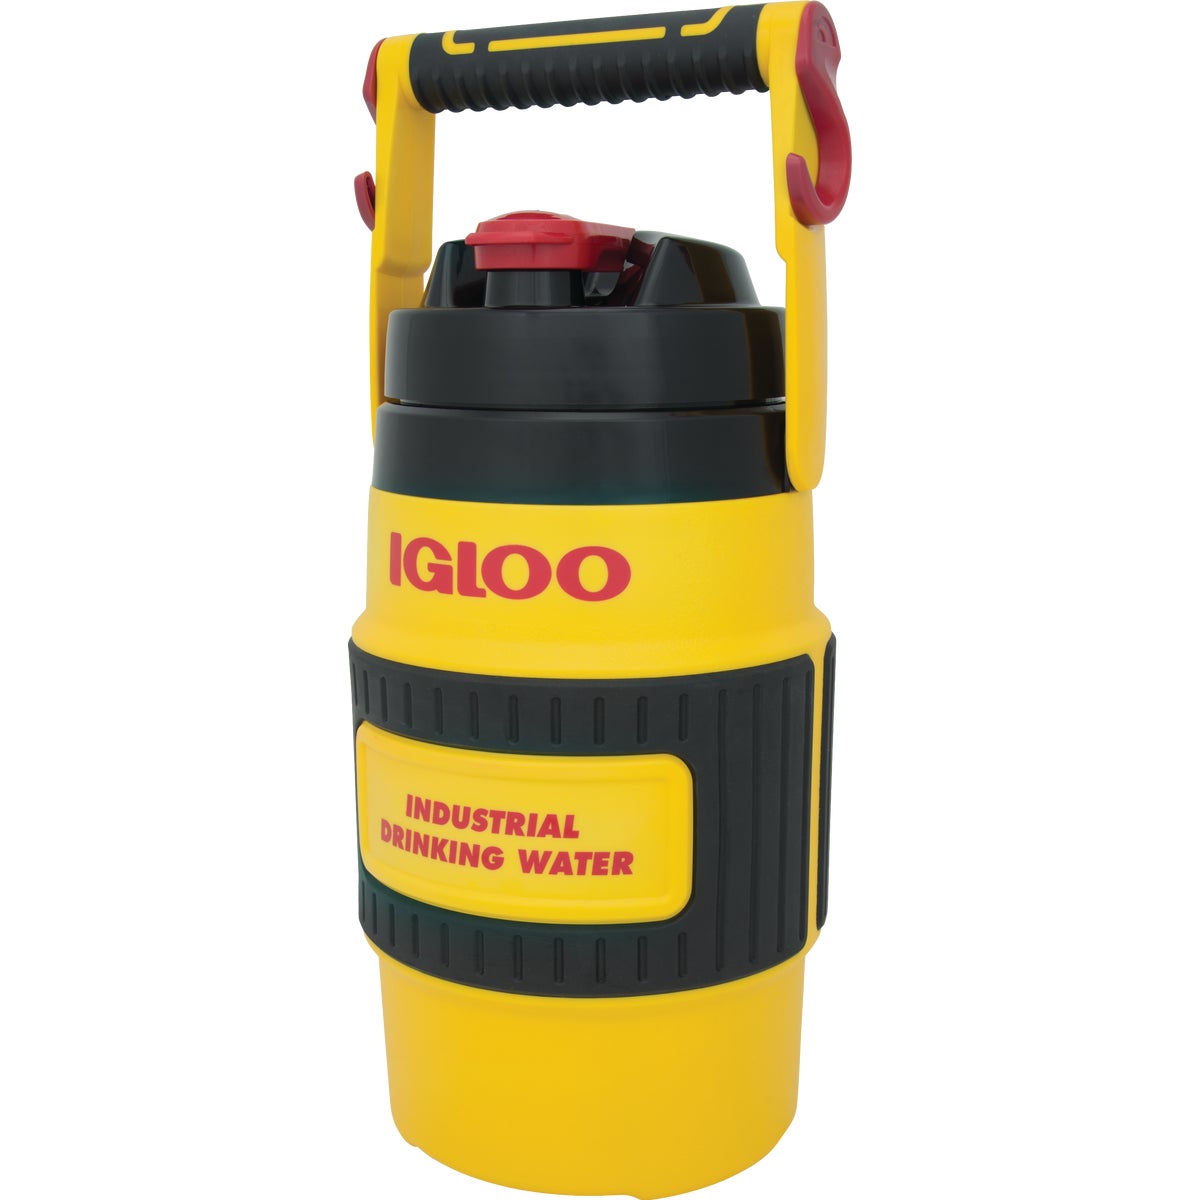 Item 802188, Foam insulated industrial water jug has a rubberized grip handle with non-